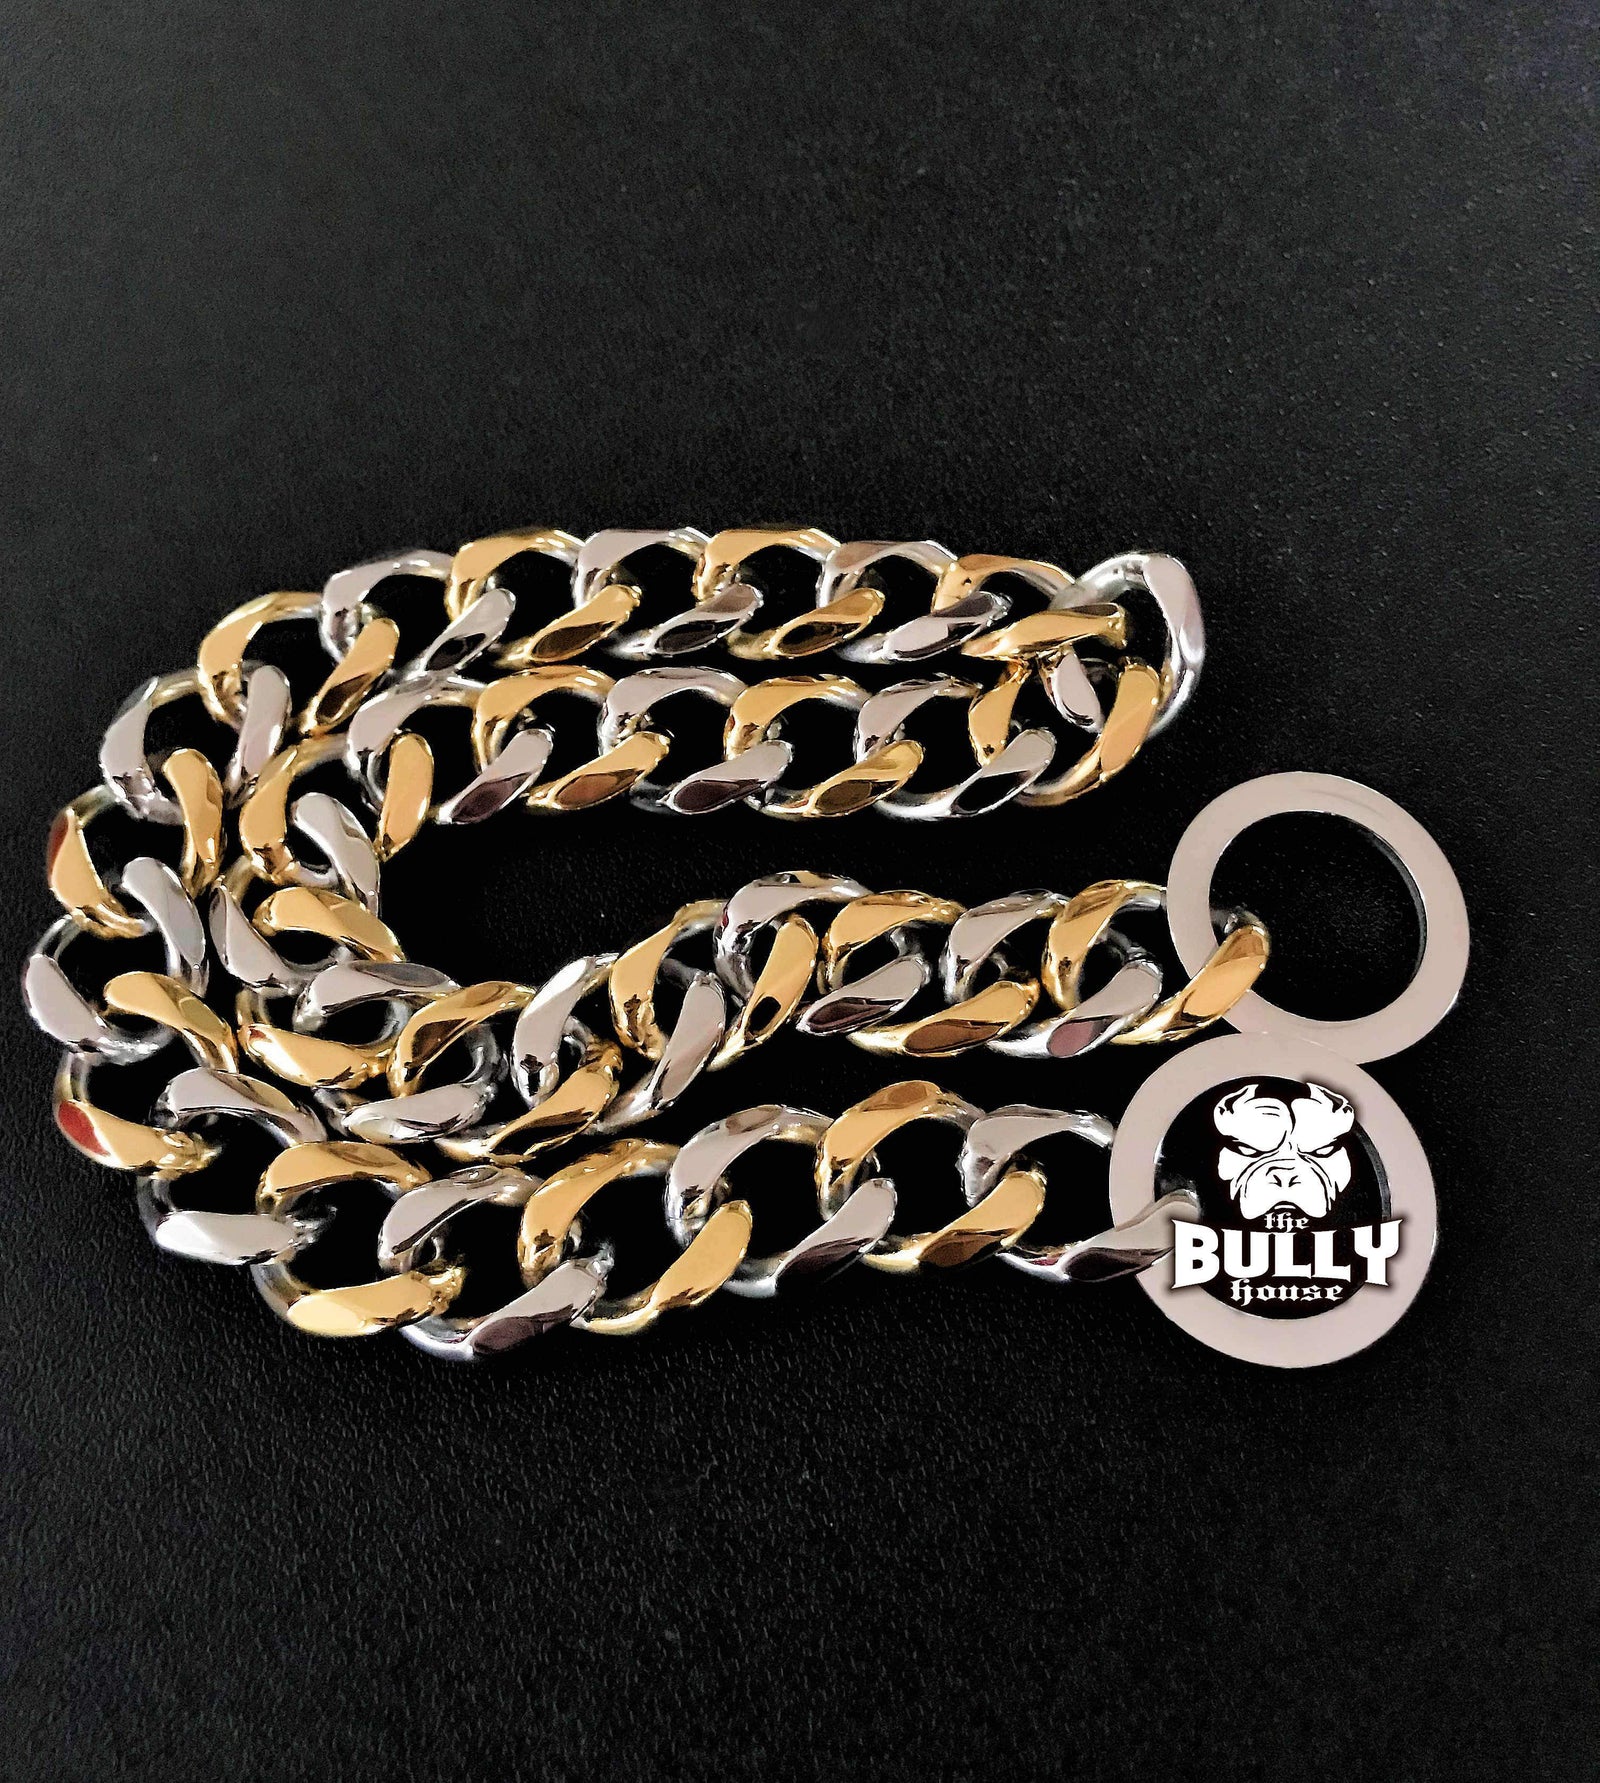 (Pre Order Now - Arriving approx end of DEC) The Bully House "CHECK CHAIN Collection" -  (2 TONE) Gold/Silver Link - 20mm Wide